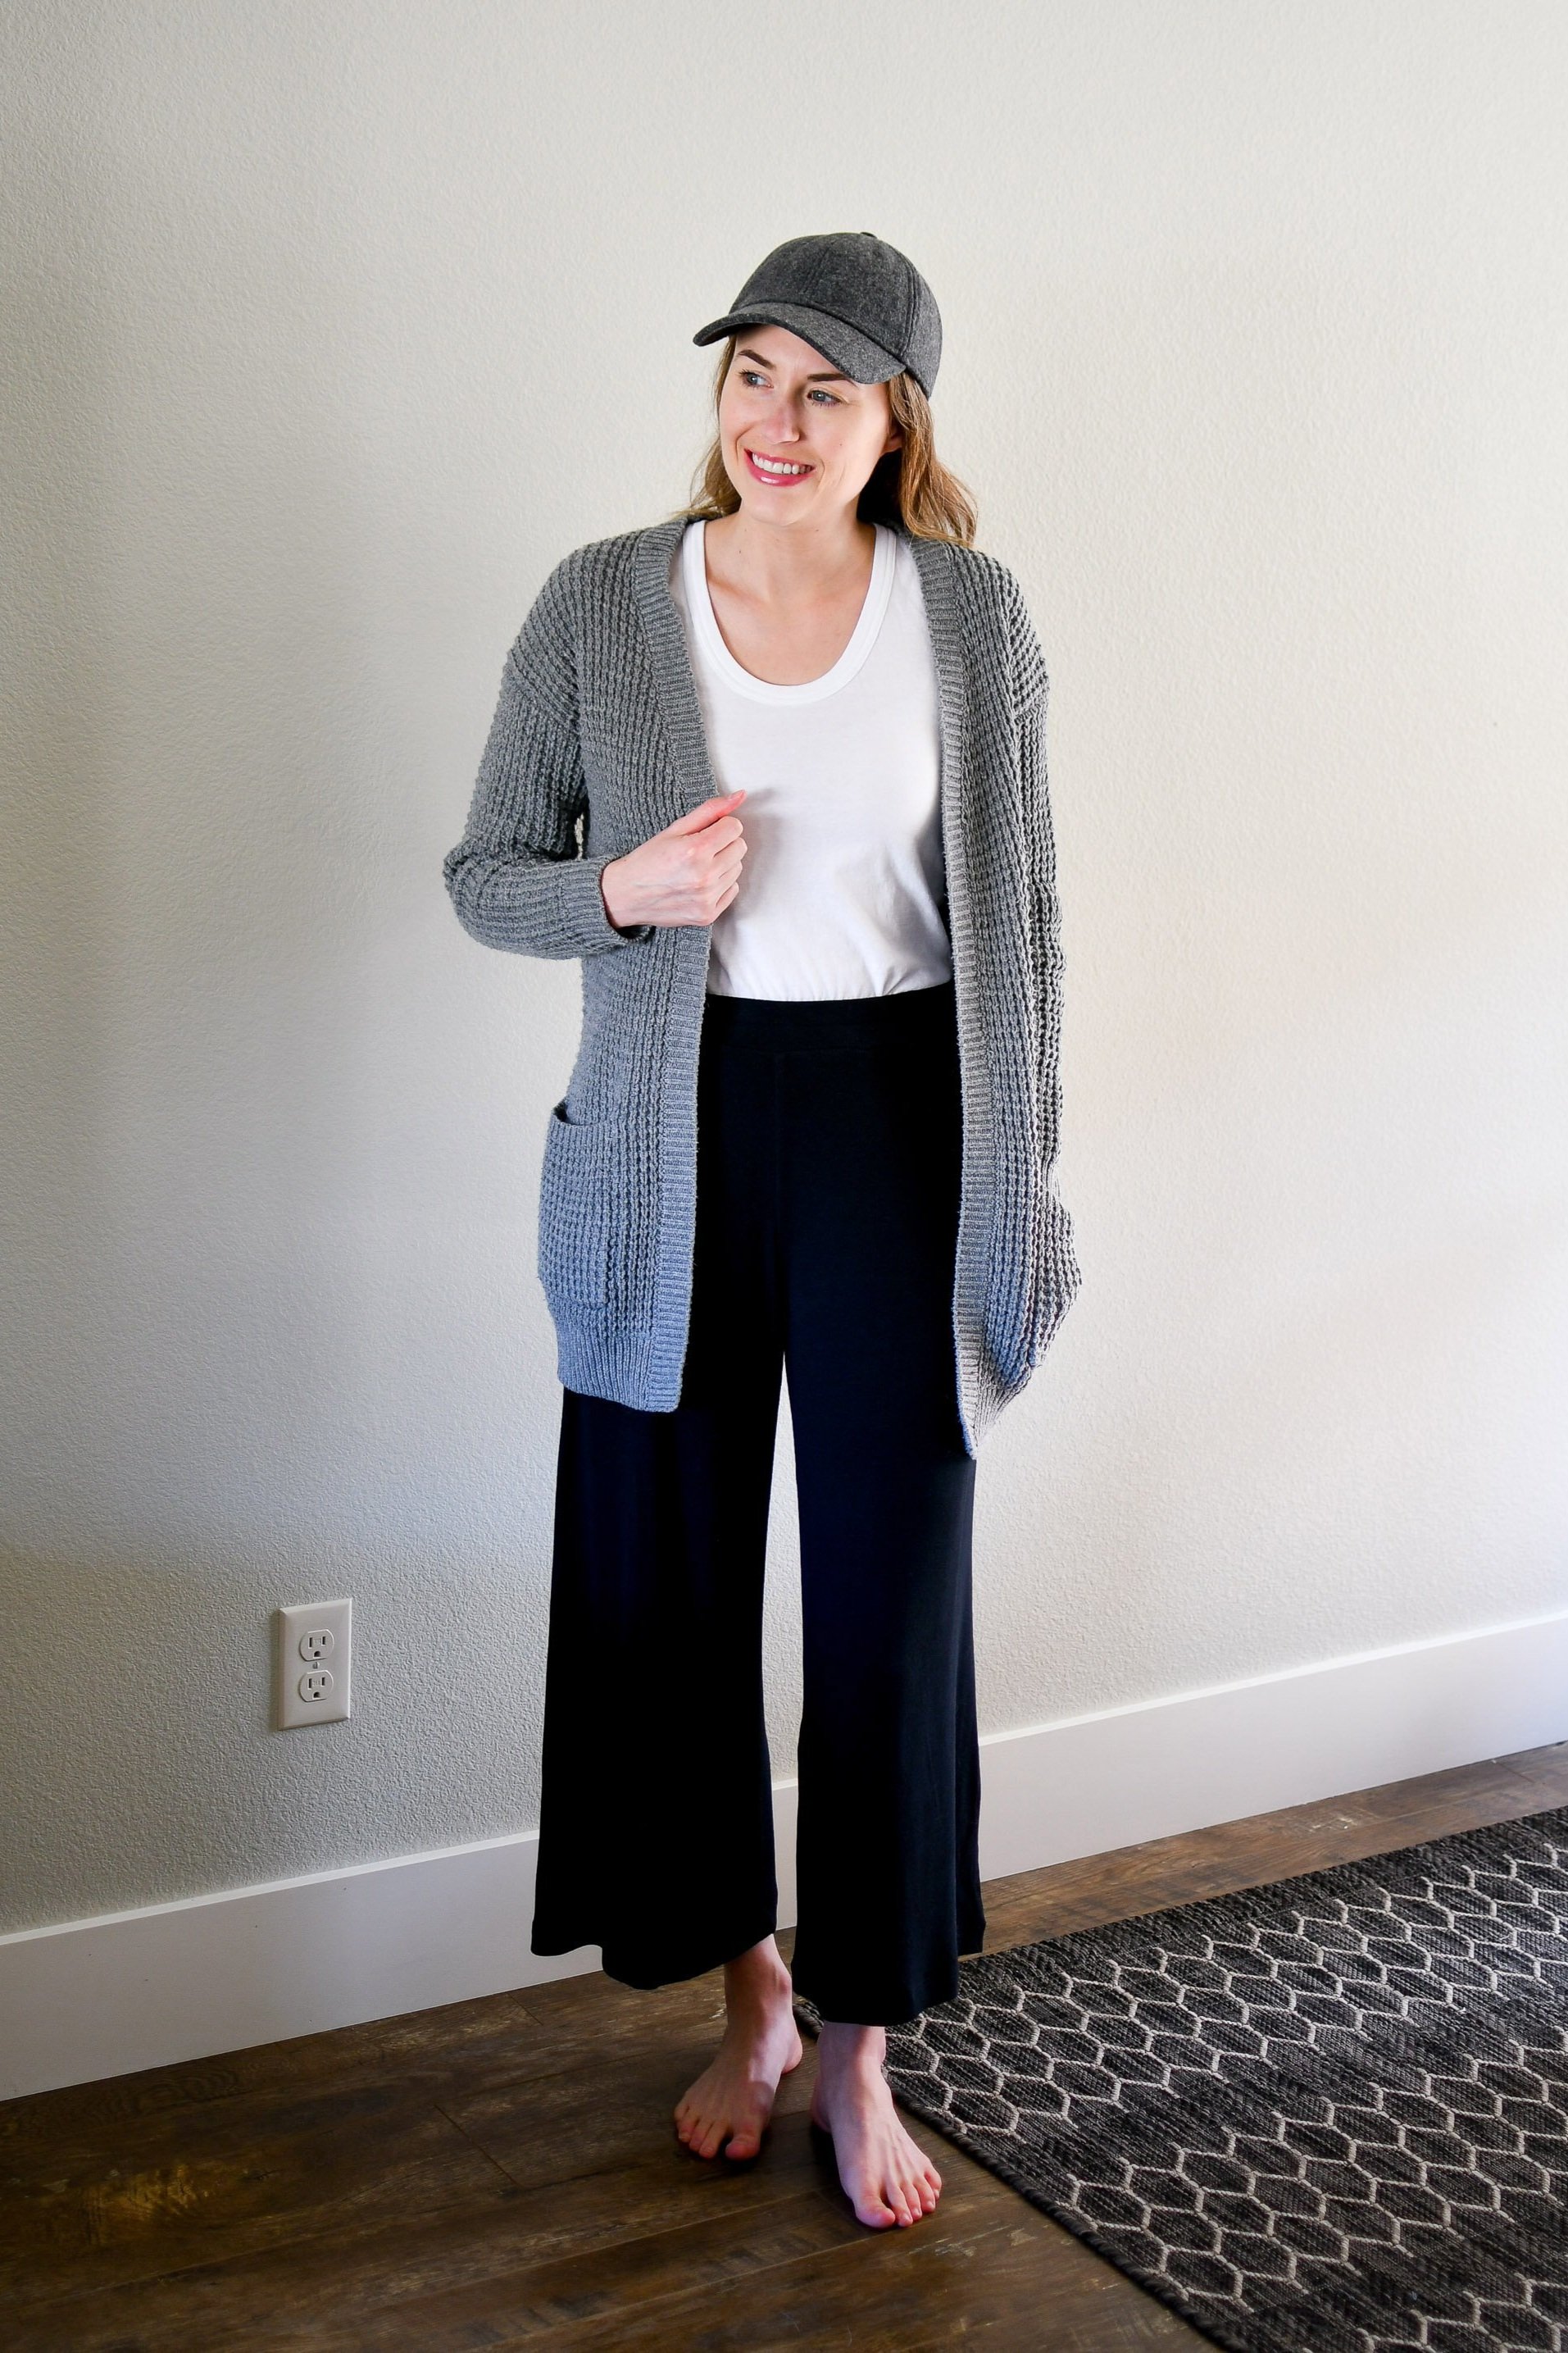 How to Wear a Long Cardigan (+ 20 Outfit Ideas!)